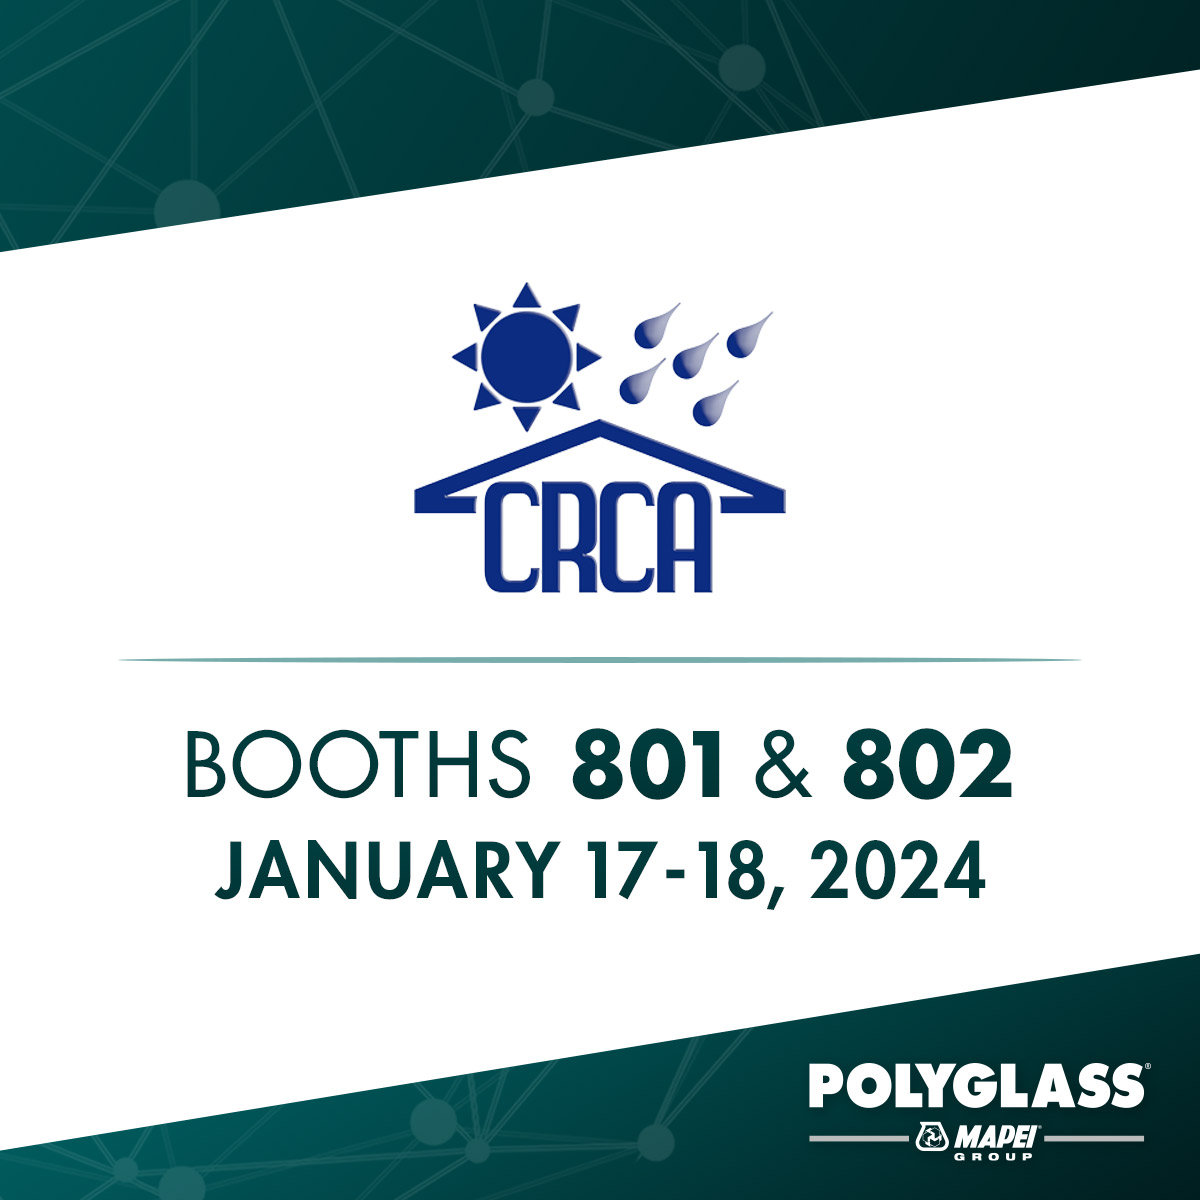 Discover the Latest from Polyglass at the CRCA Tradeshow in Illinois ...